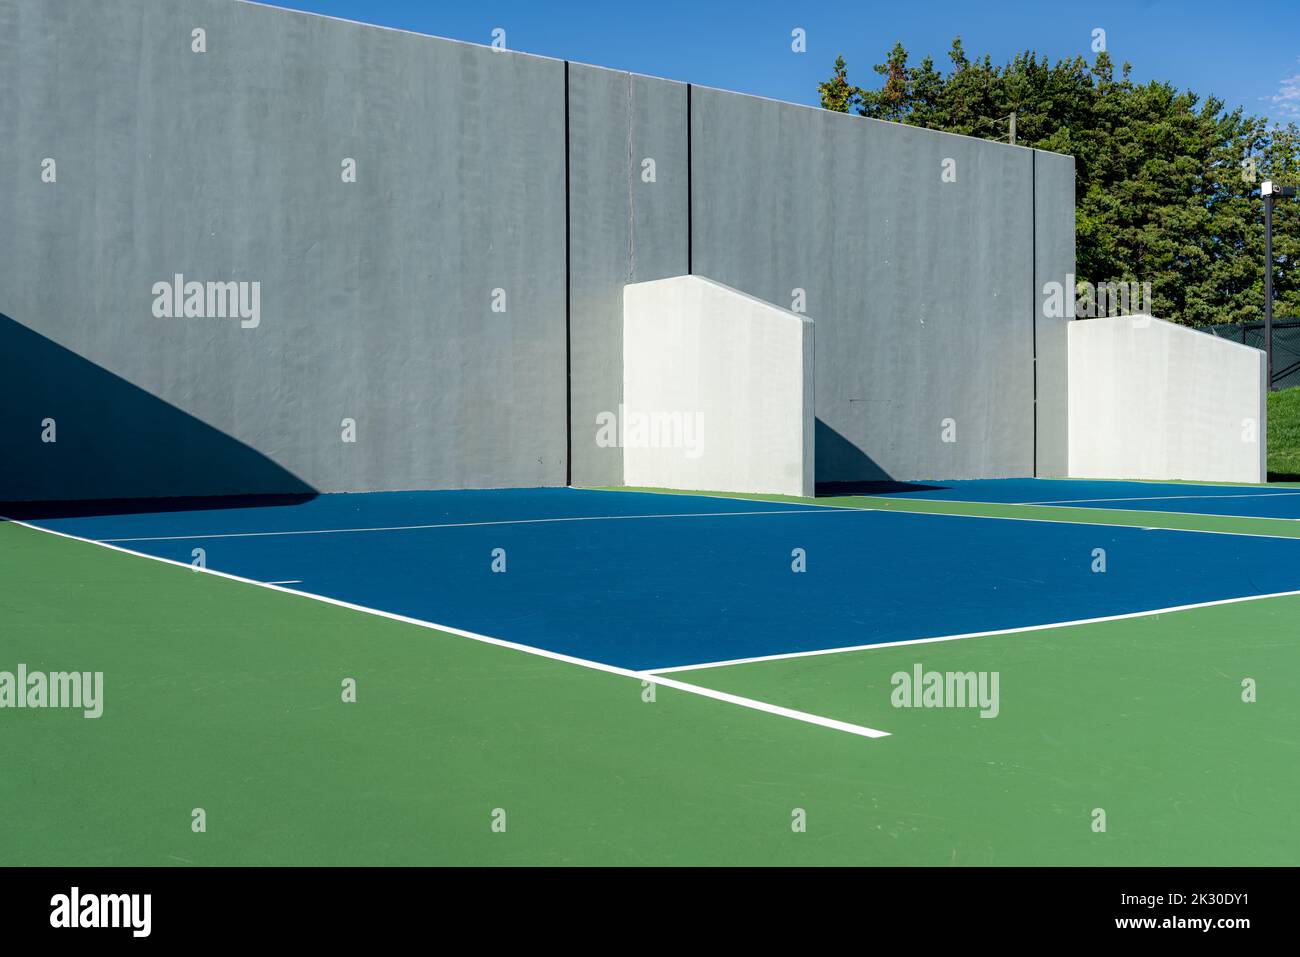 Example Of An Outside American Handball Courts With Concrete Wall Located At A Park Or School 2K30DY1 